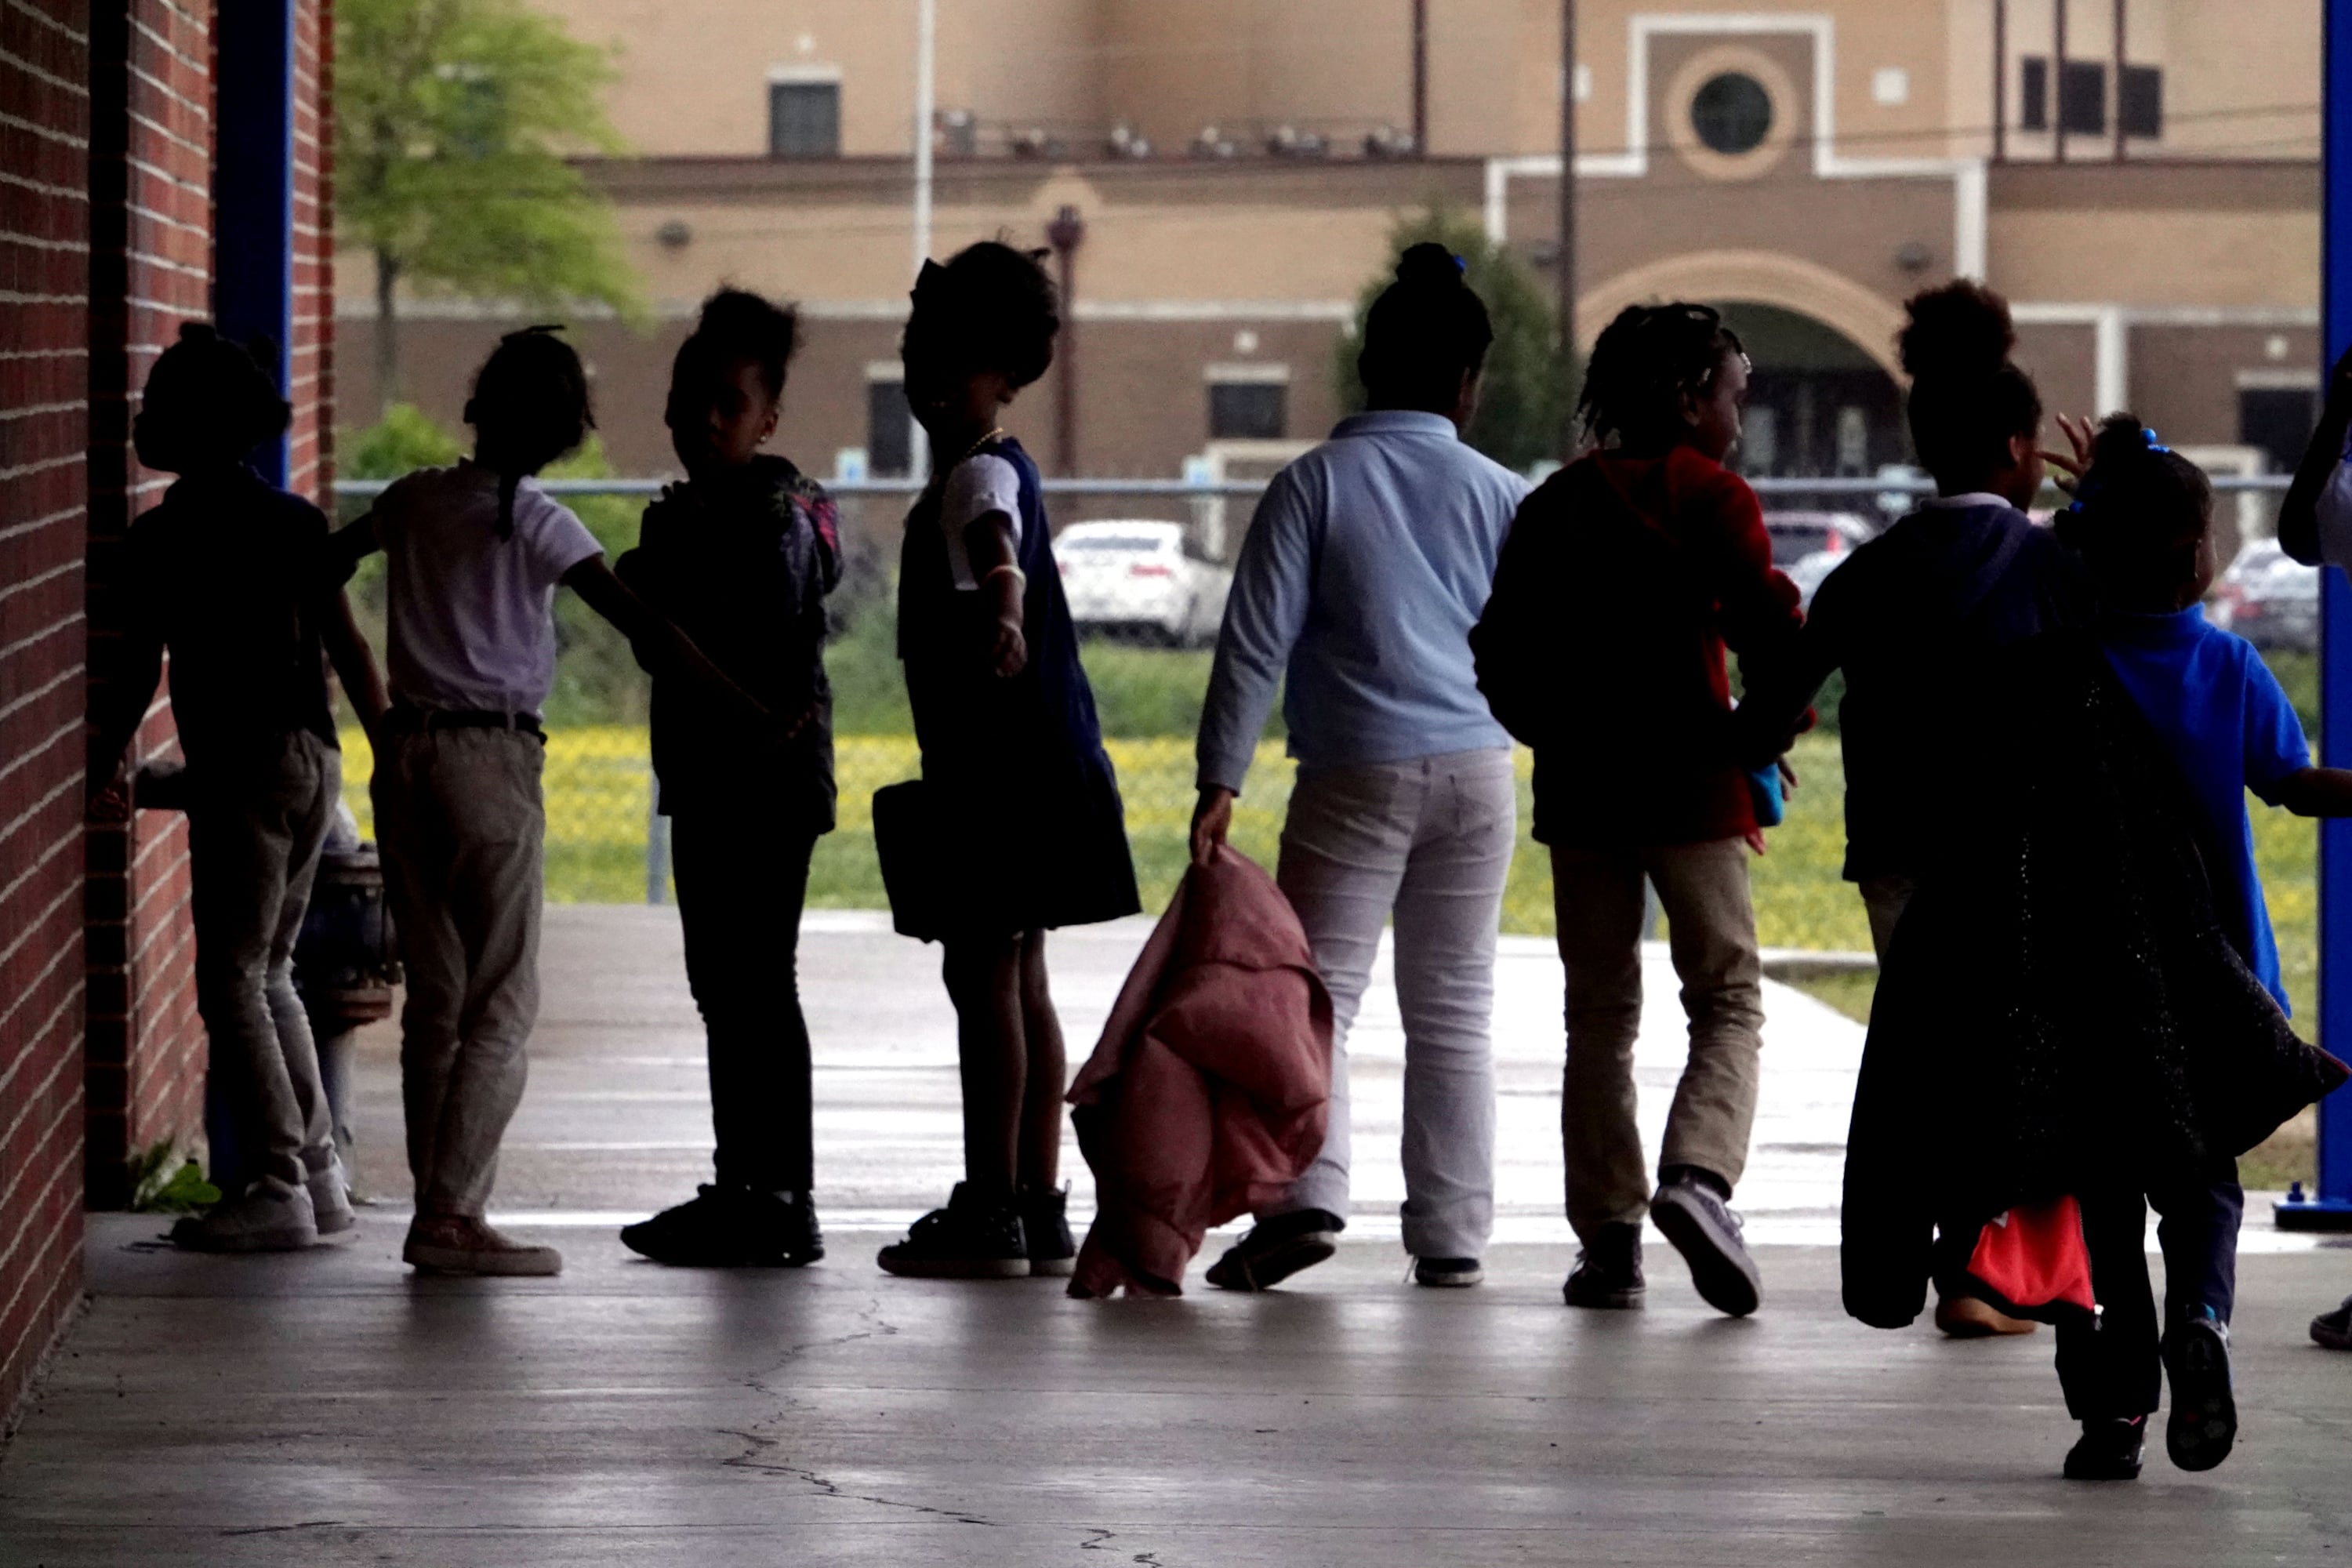 Young students line up outside of a school building.